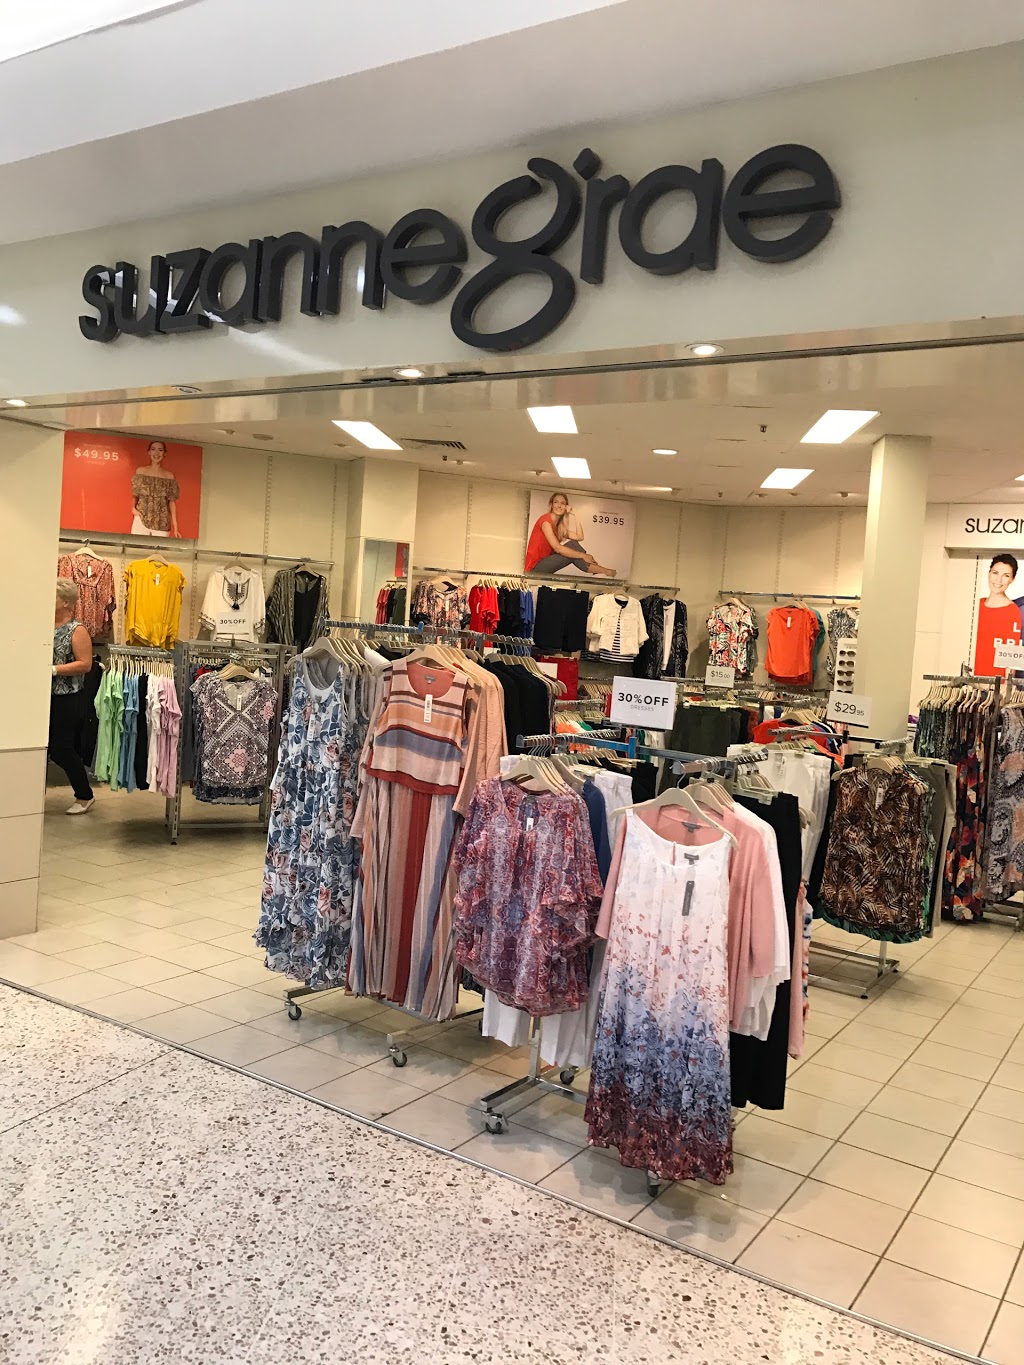 Suzanne Grae | clothing store | Shop 29/30 , Seven Hills Shopping Centre, Cnr Prospect Highway &, Federal Rd, Seven Hills NSW 2174, Australia | 0298311684 OR +61 2 9831 1684